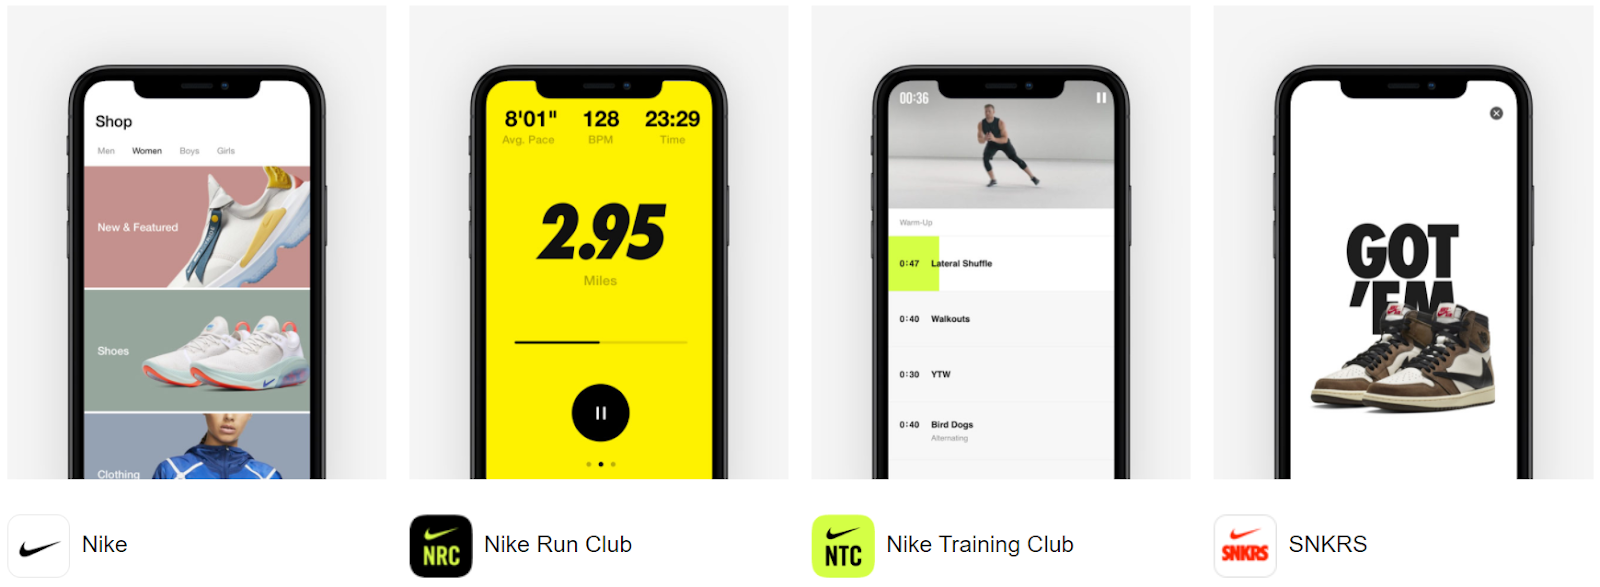 How to Get the Most Out of Your Nike Membership